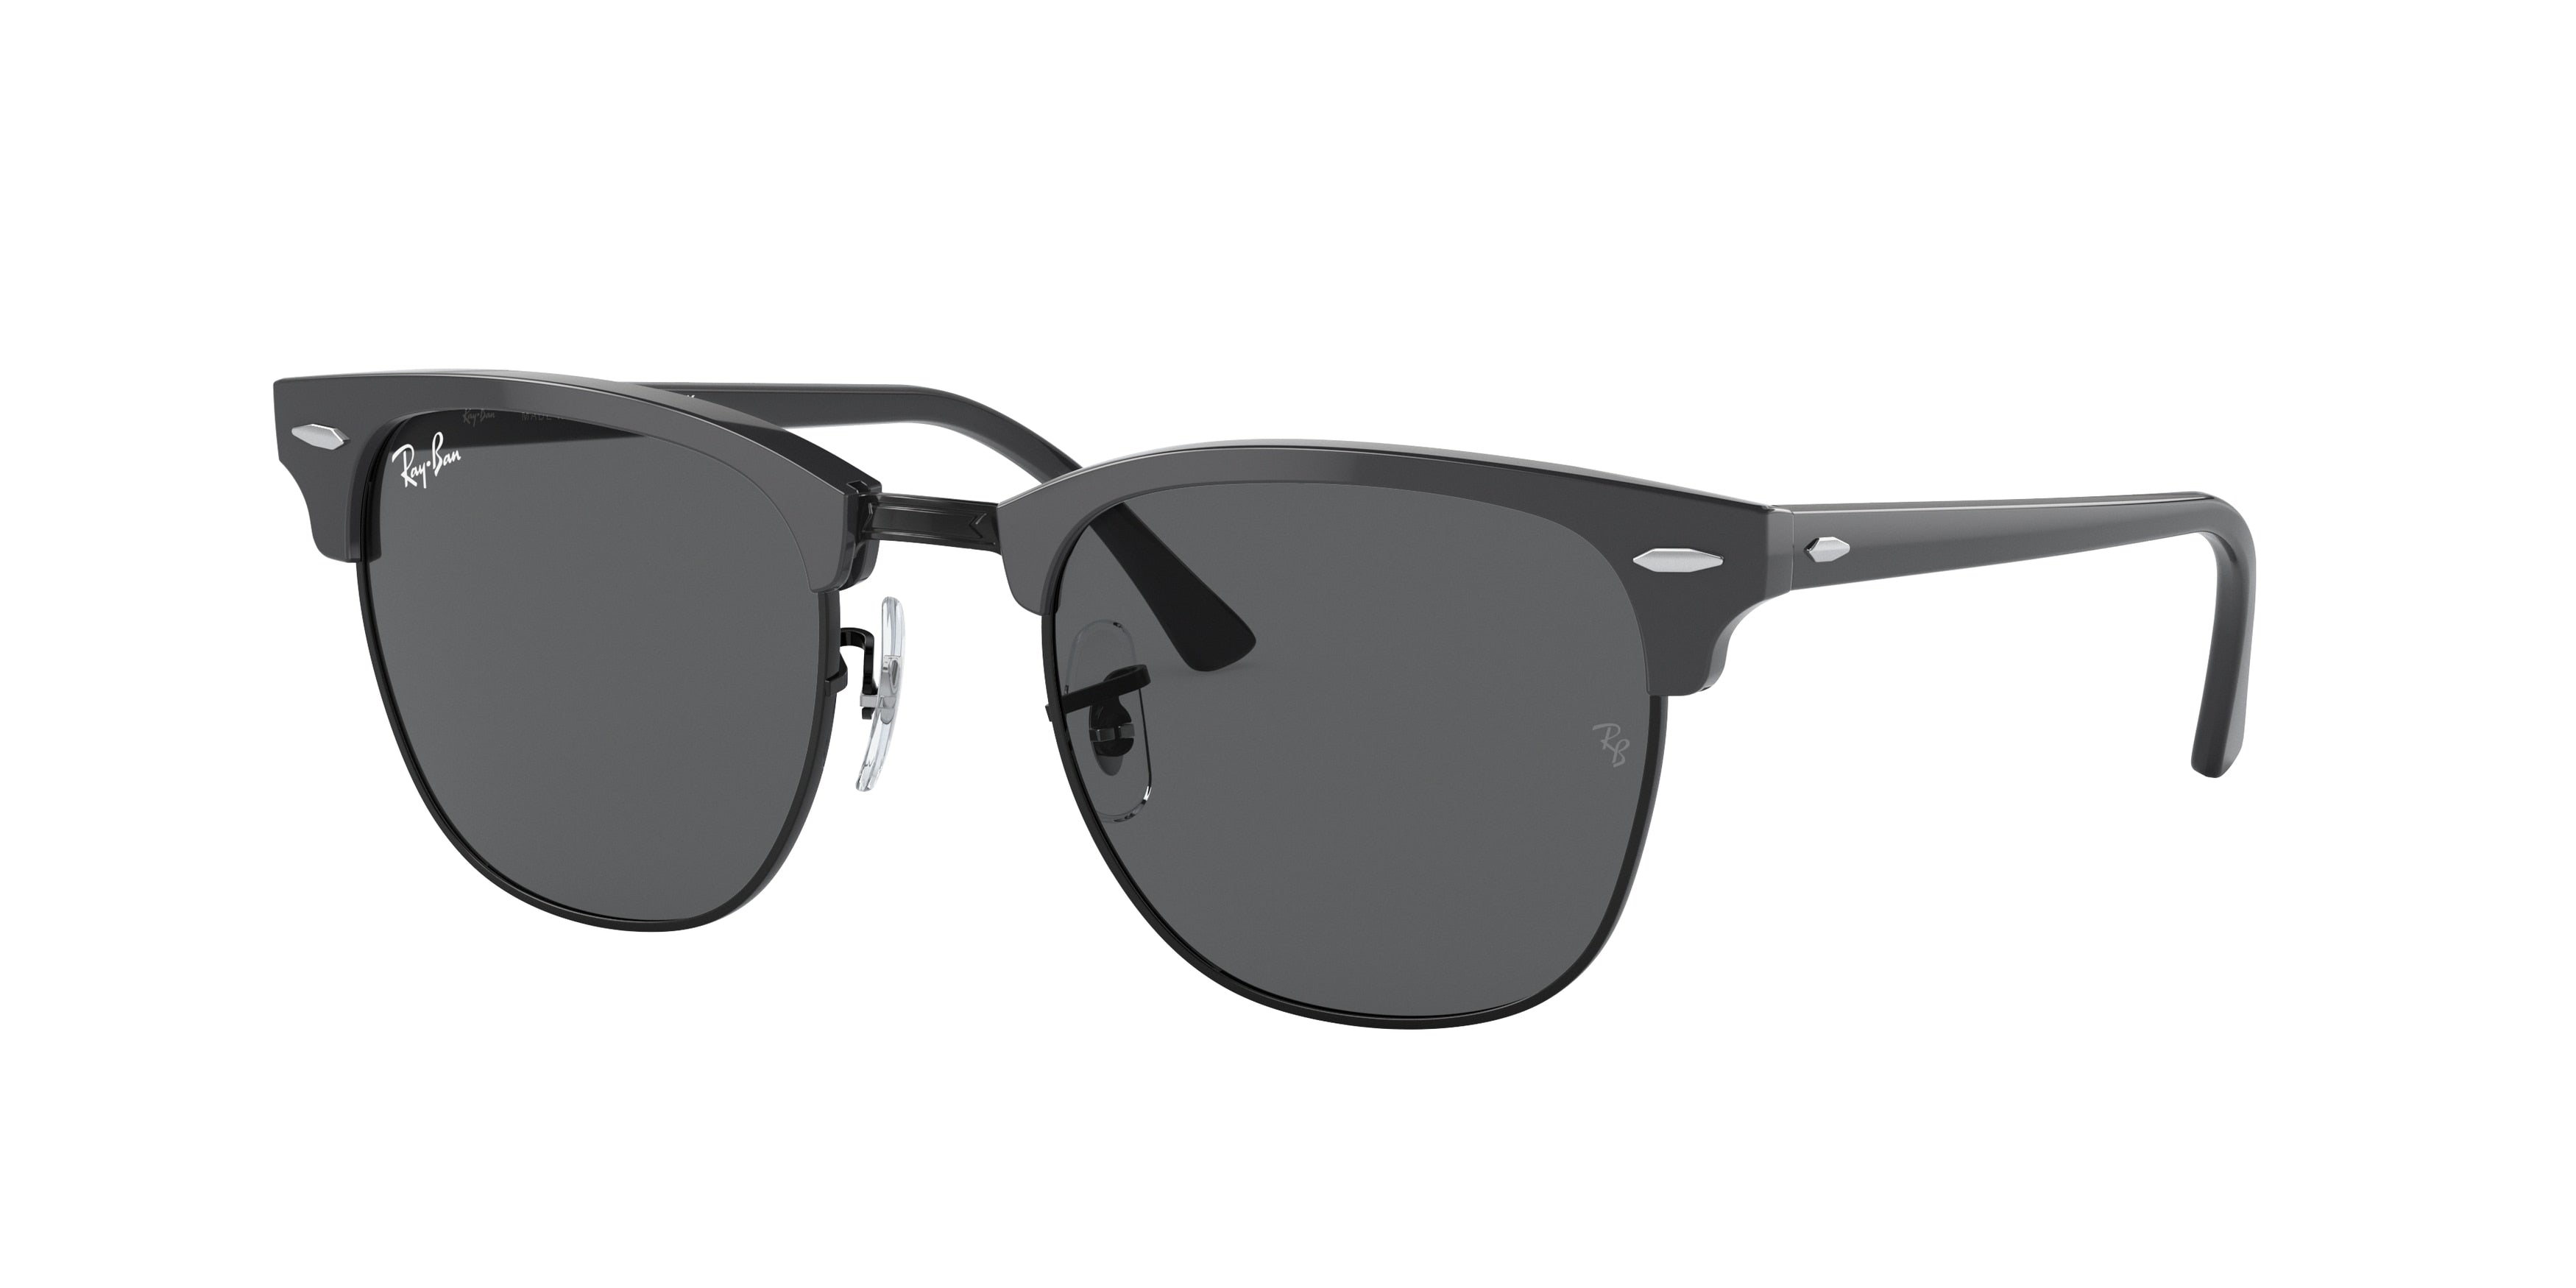 Ray-Ban CLUBMASTER RB3016 Square Sunglasses  1367B1-Grey On Black 55-150-21 - Color Map Grey